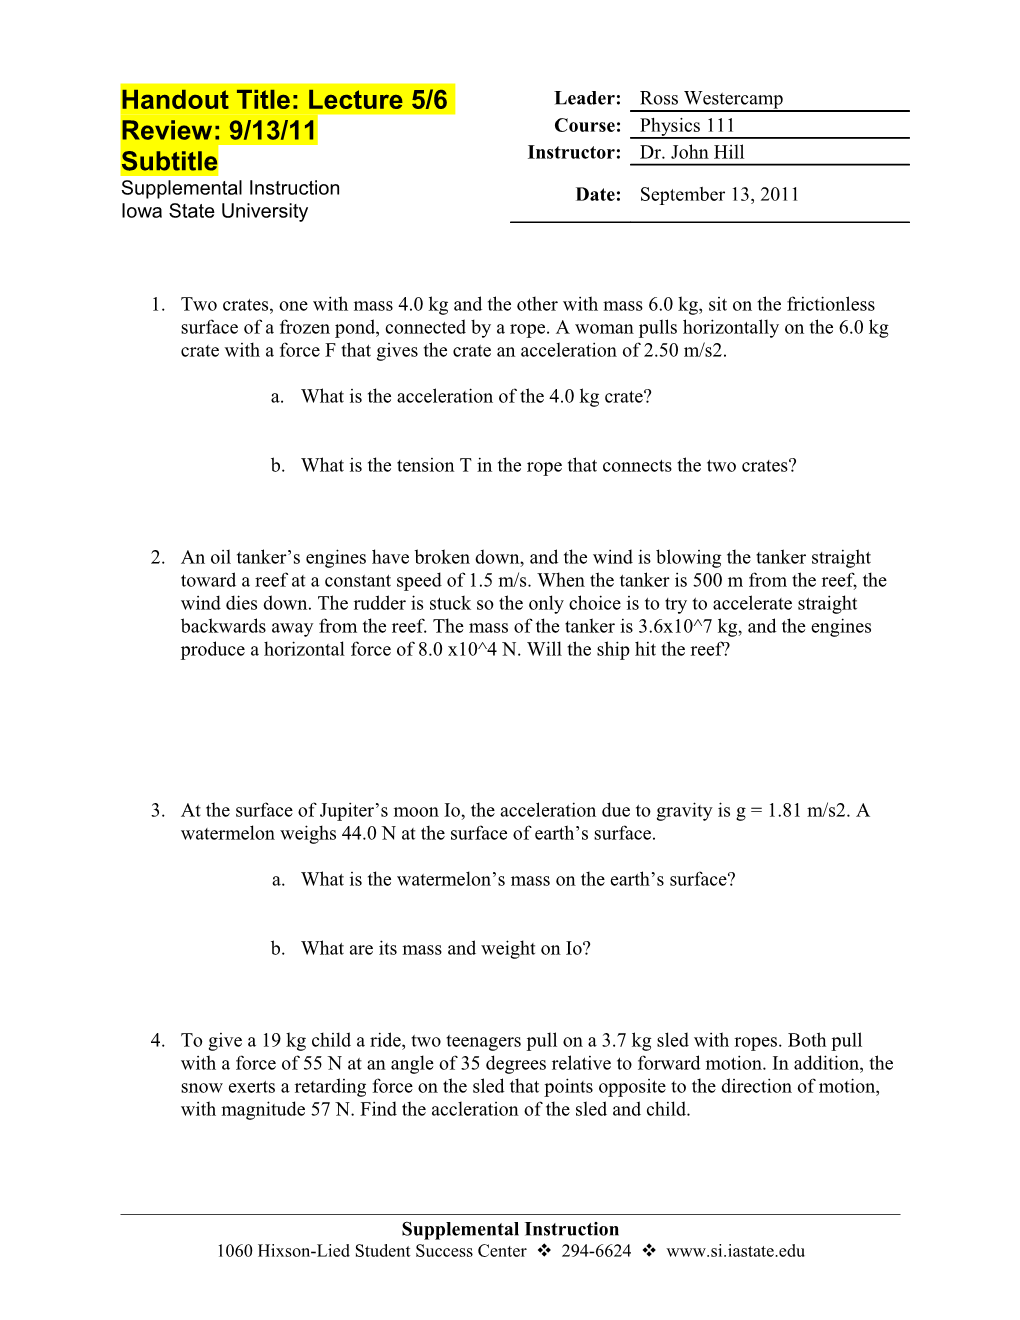 Handout Title: Lecture 5/6 Review: 9/13/11 Subtitle Supplemental Instruction Iowa State